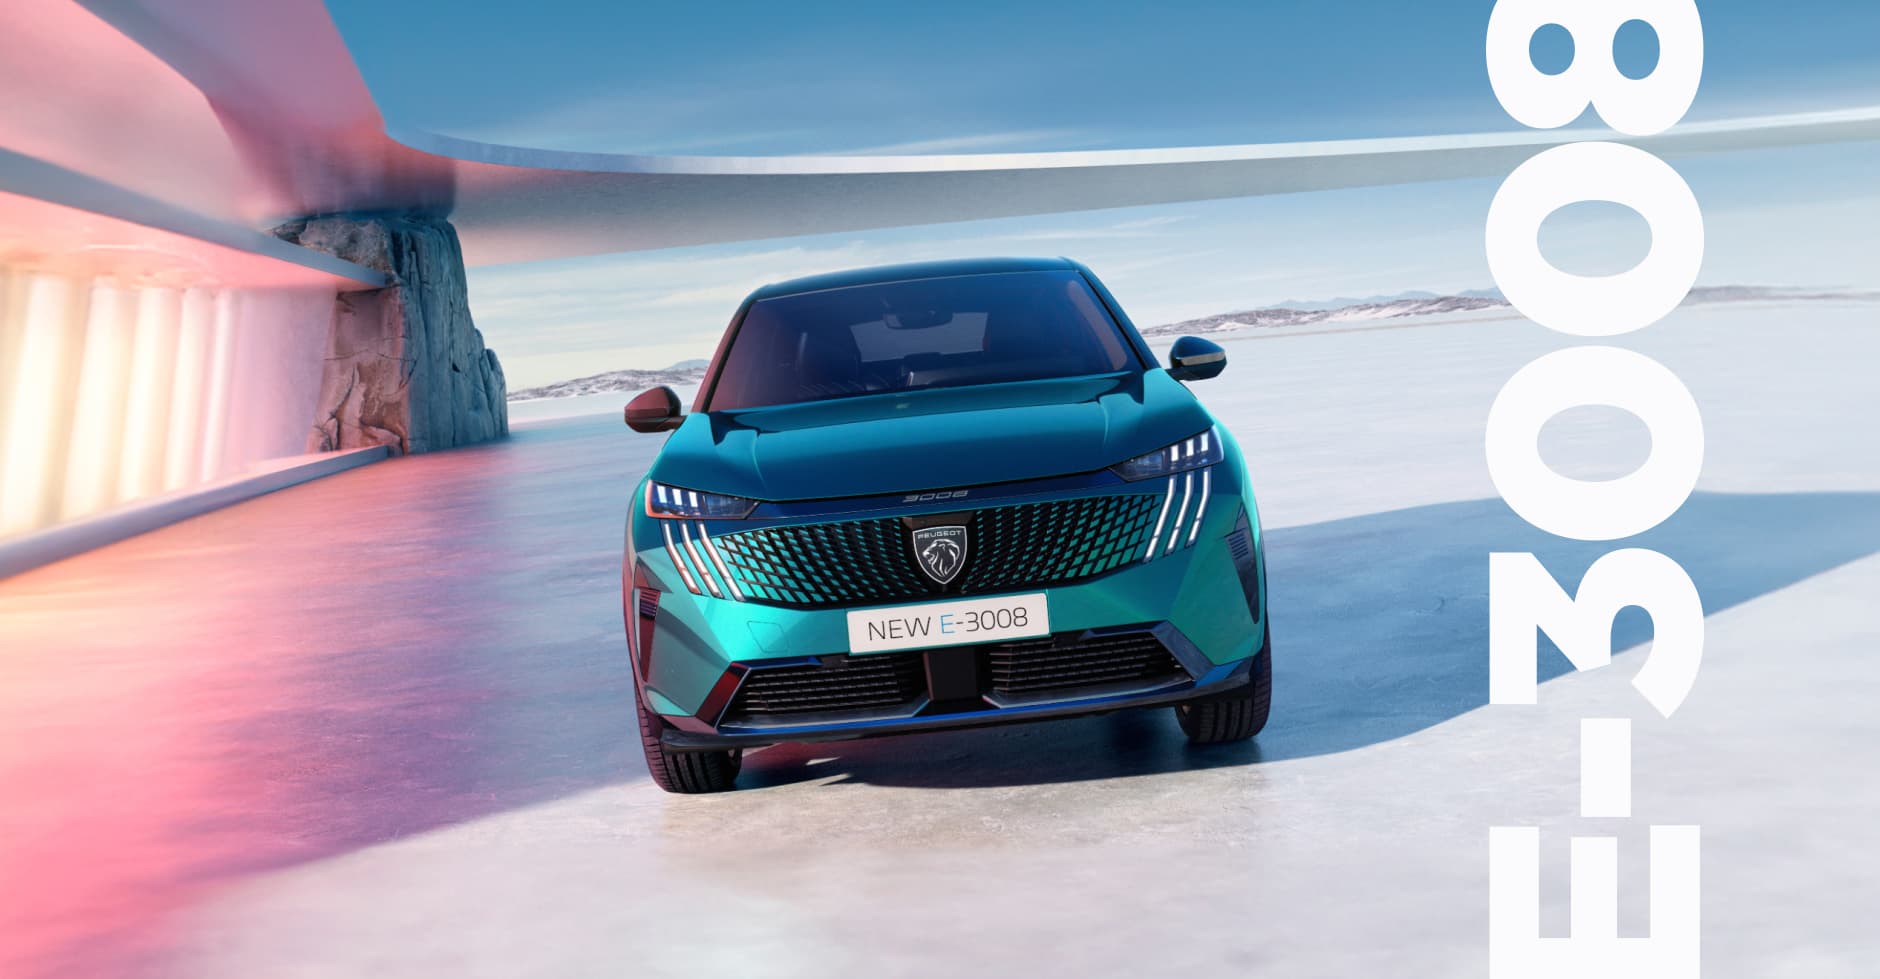 Front view of Peugeot 3008 with gradient background